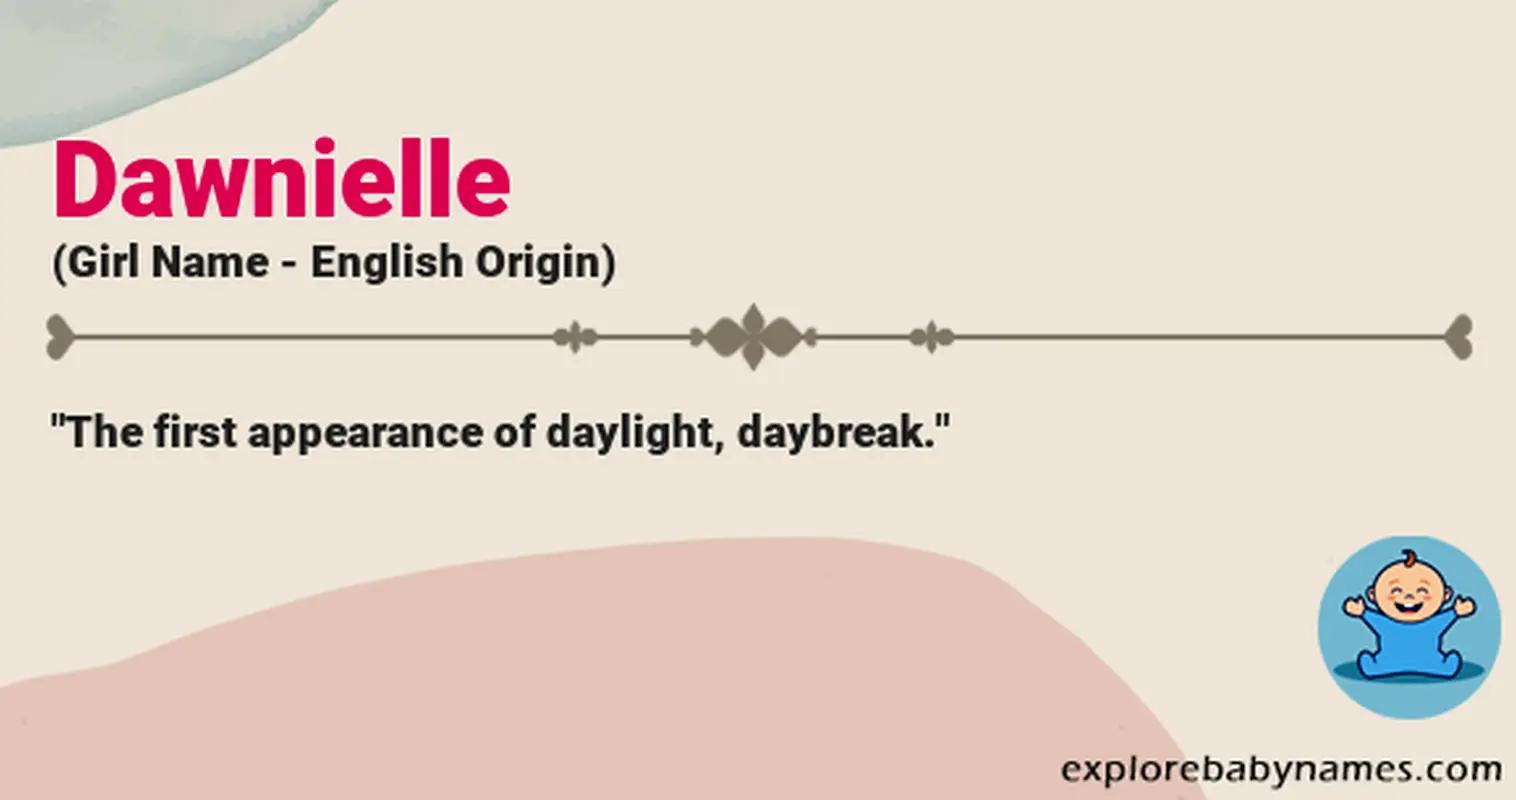 Meaning of Dawnielle